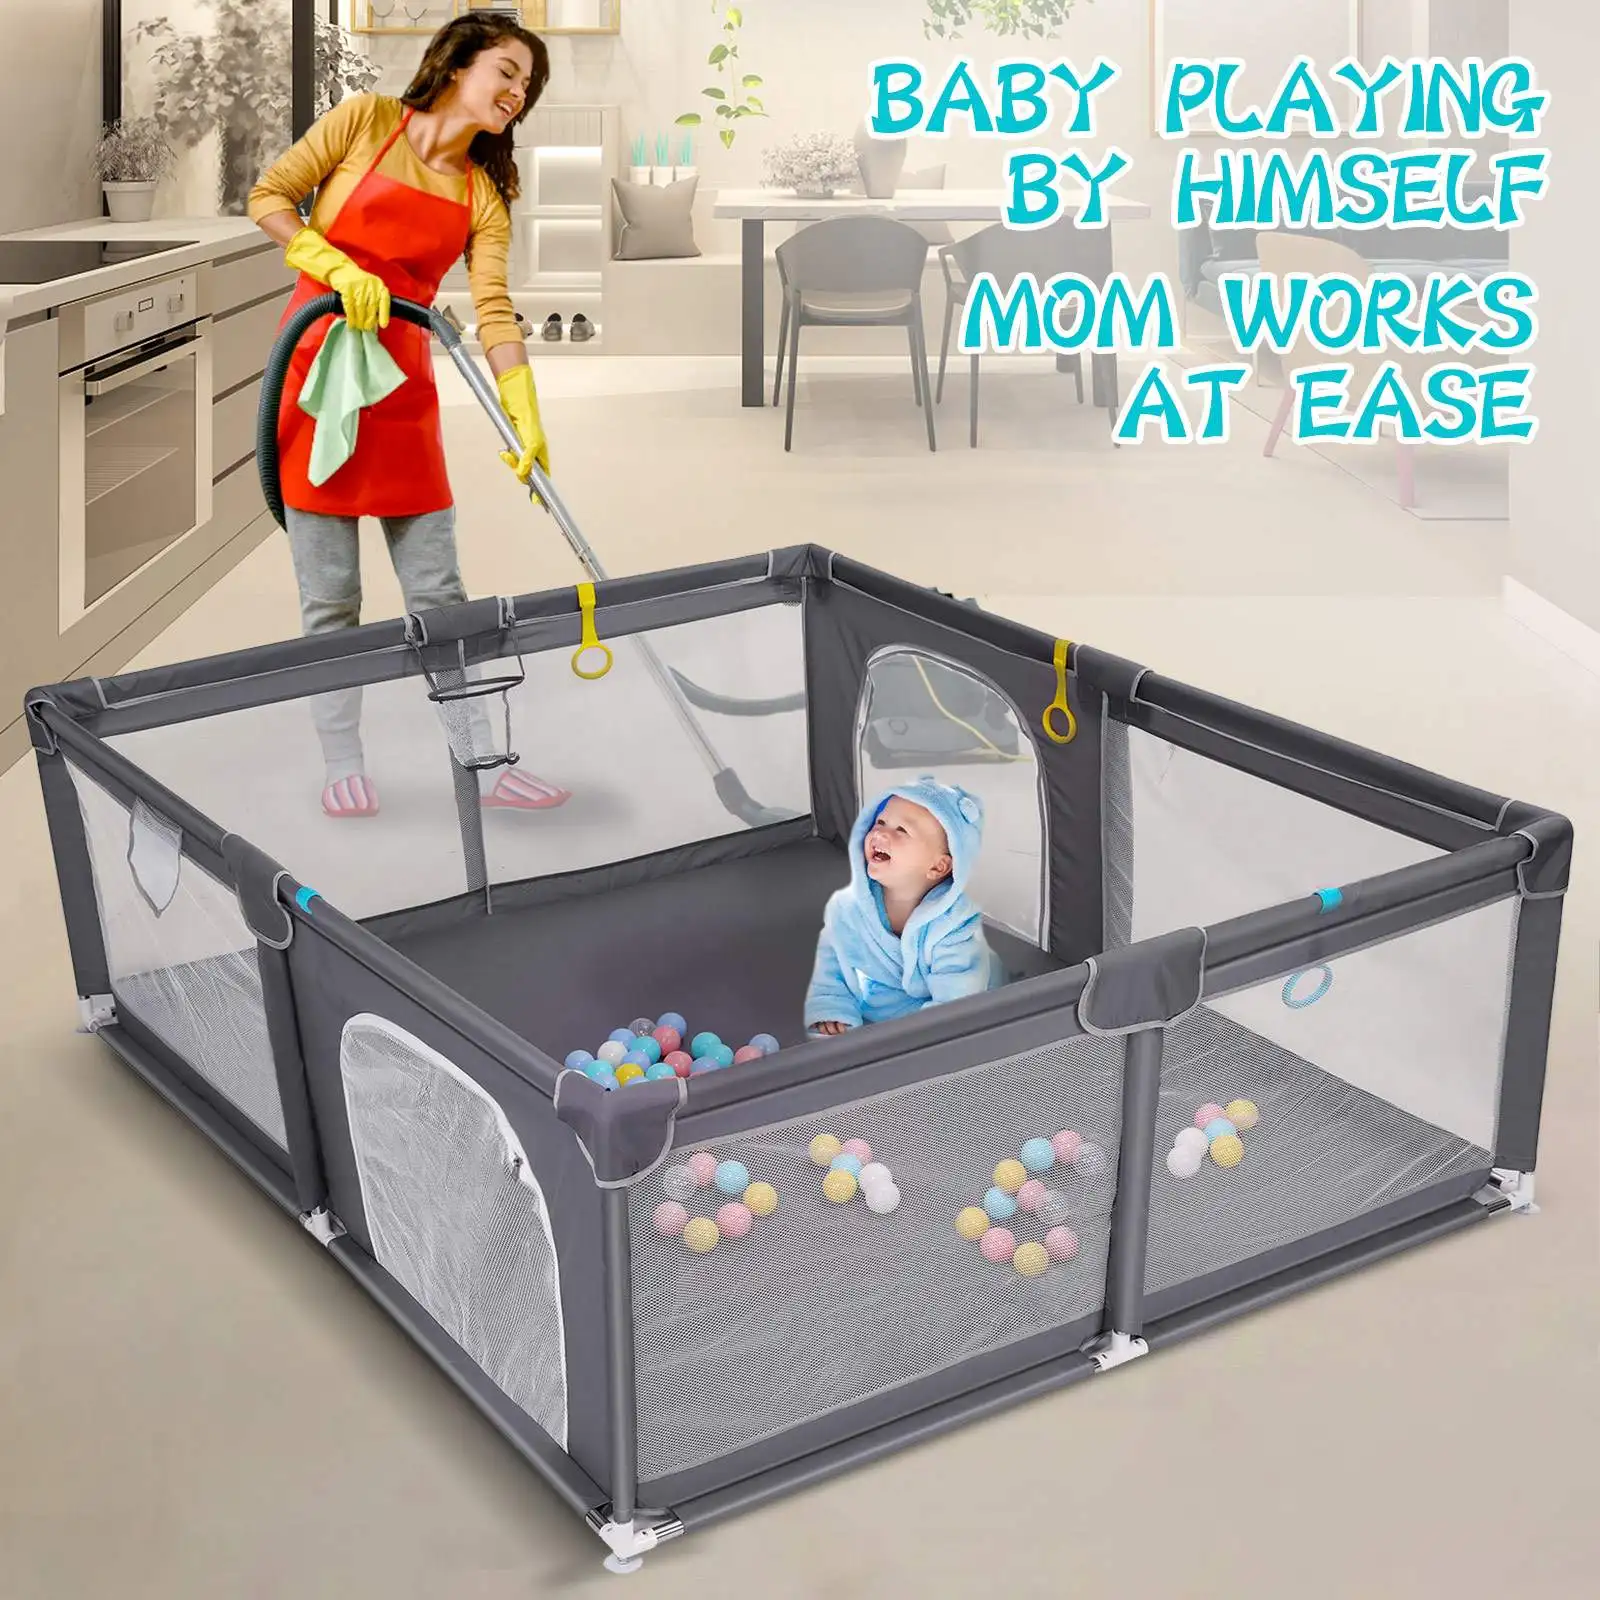 

Bioby Baby Playpen Large Playpen for Babies and Toddlers Sturdy Safety Huge Play Yard Play Pen with Gate Giant Play Yard for Kid